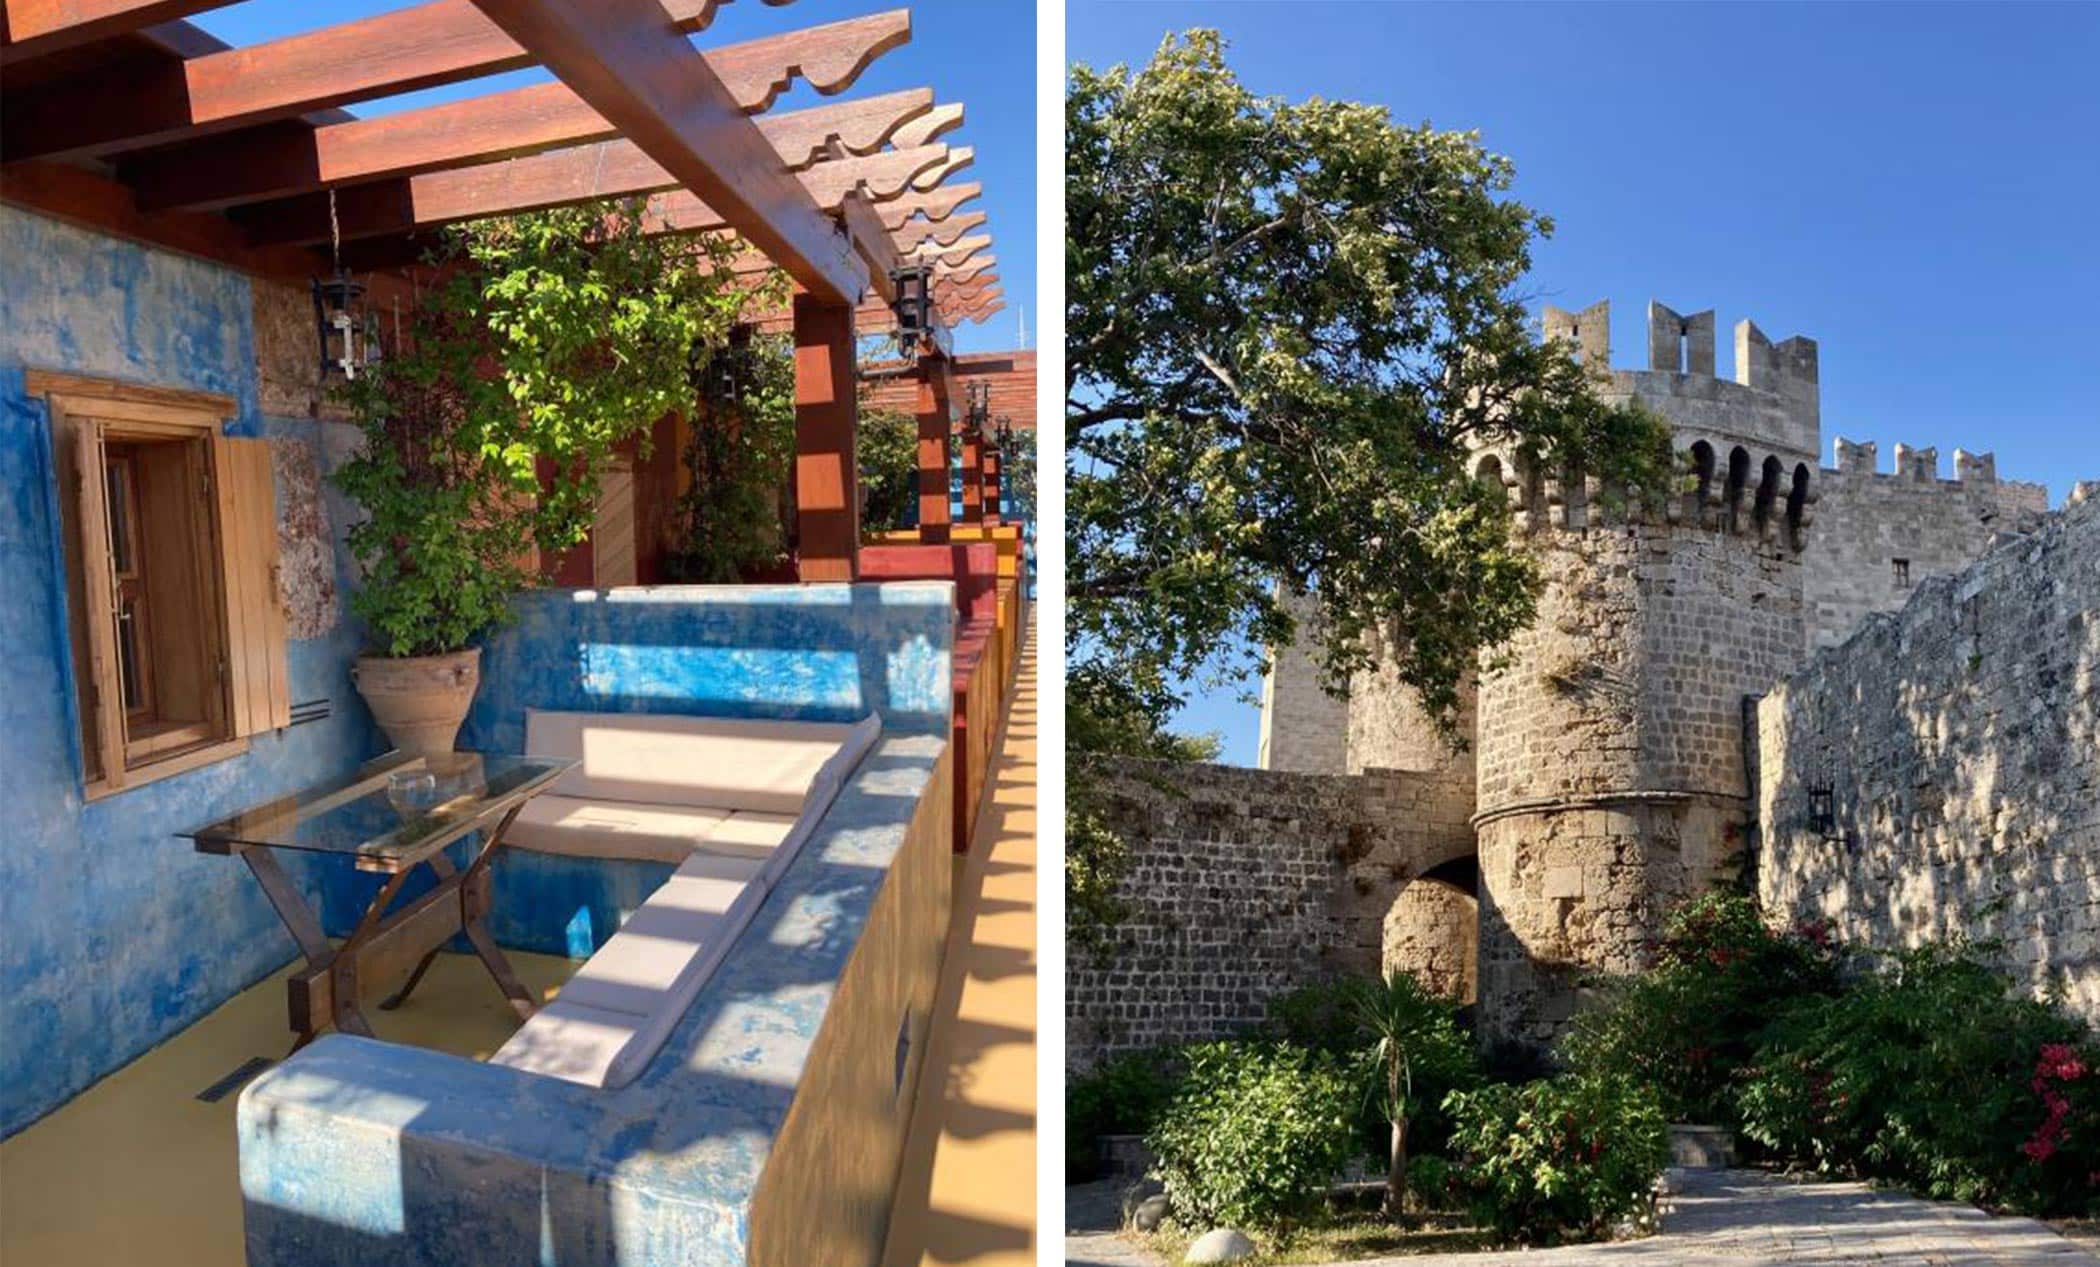 Dodecanese Sailing Itinerary - image of a beautiful outdoor patio and one of old town rhodes, a stone city wall